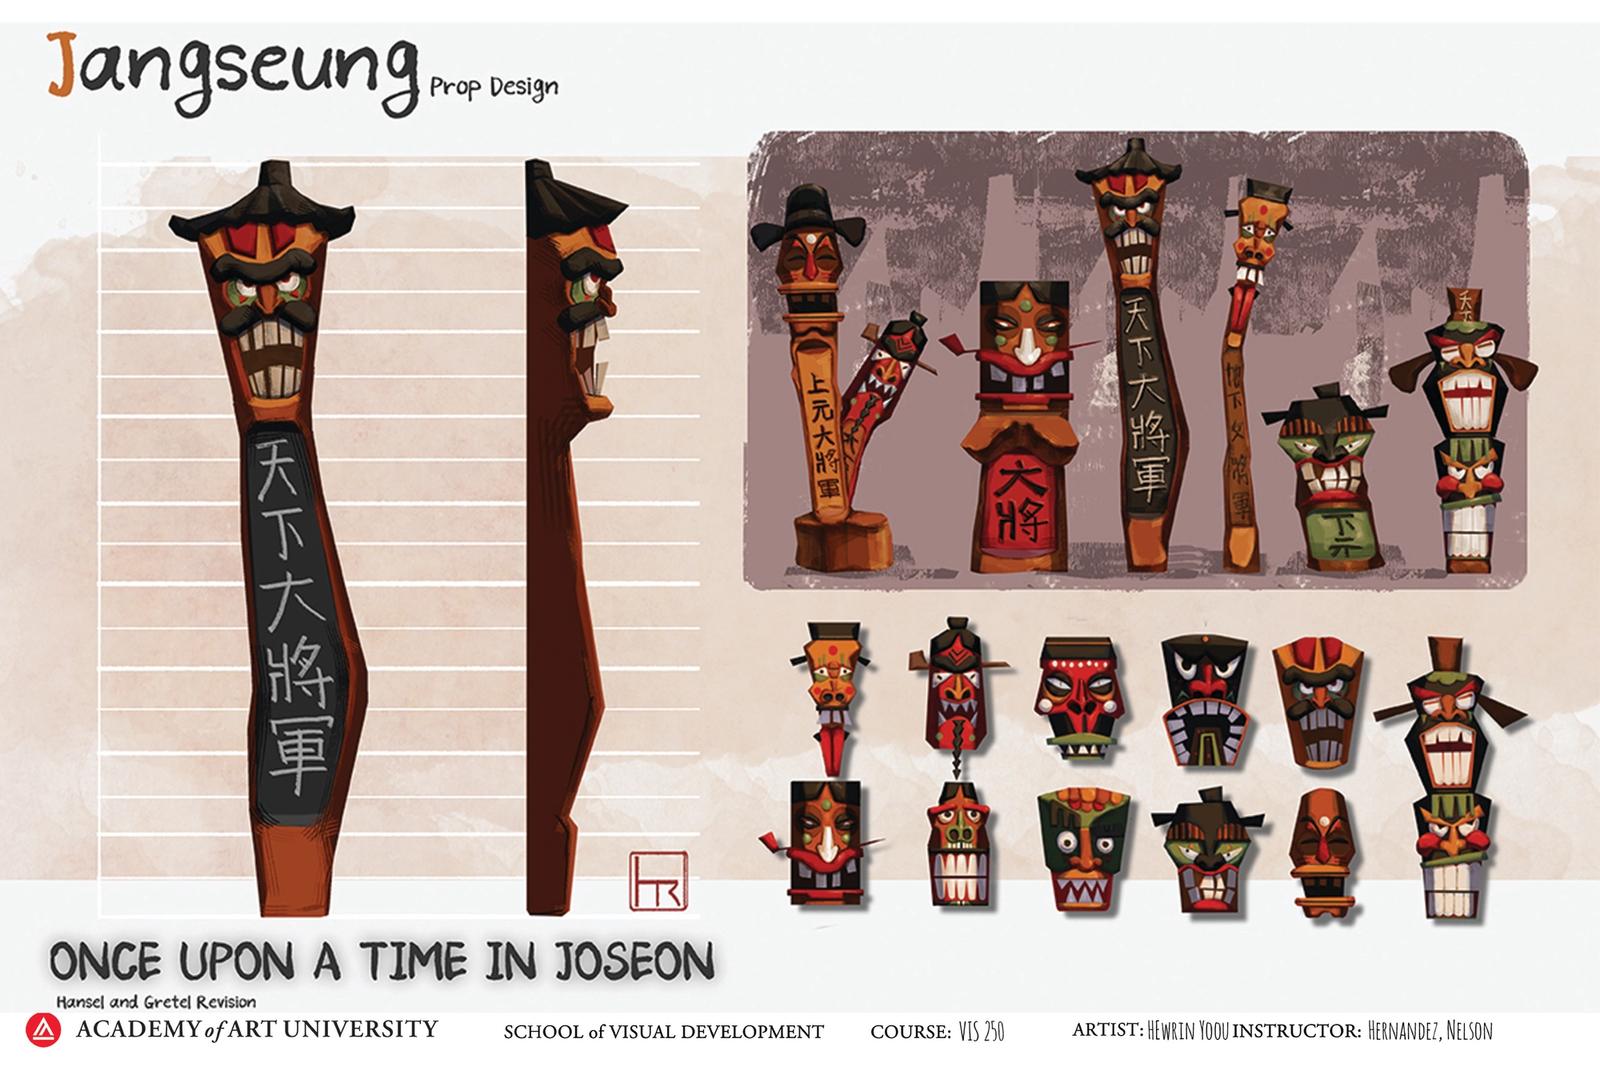 Once Upon a Time in Joseon - Prop Design